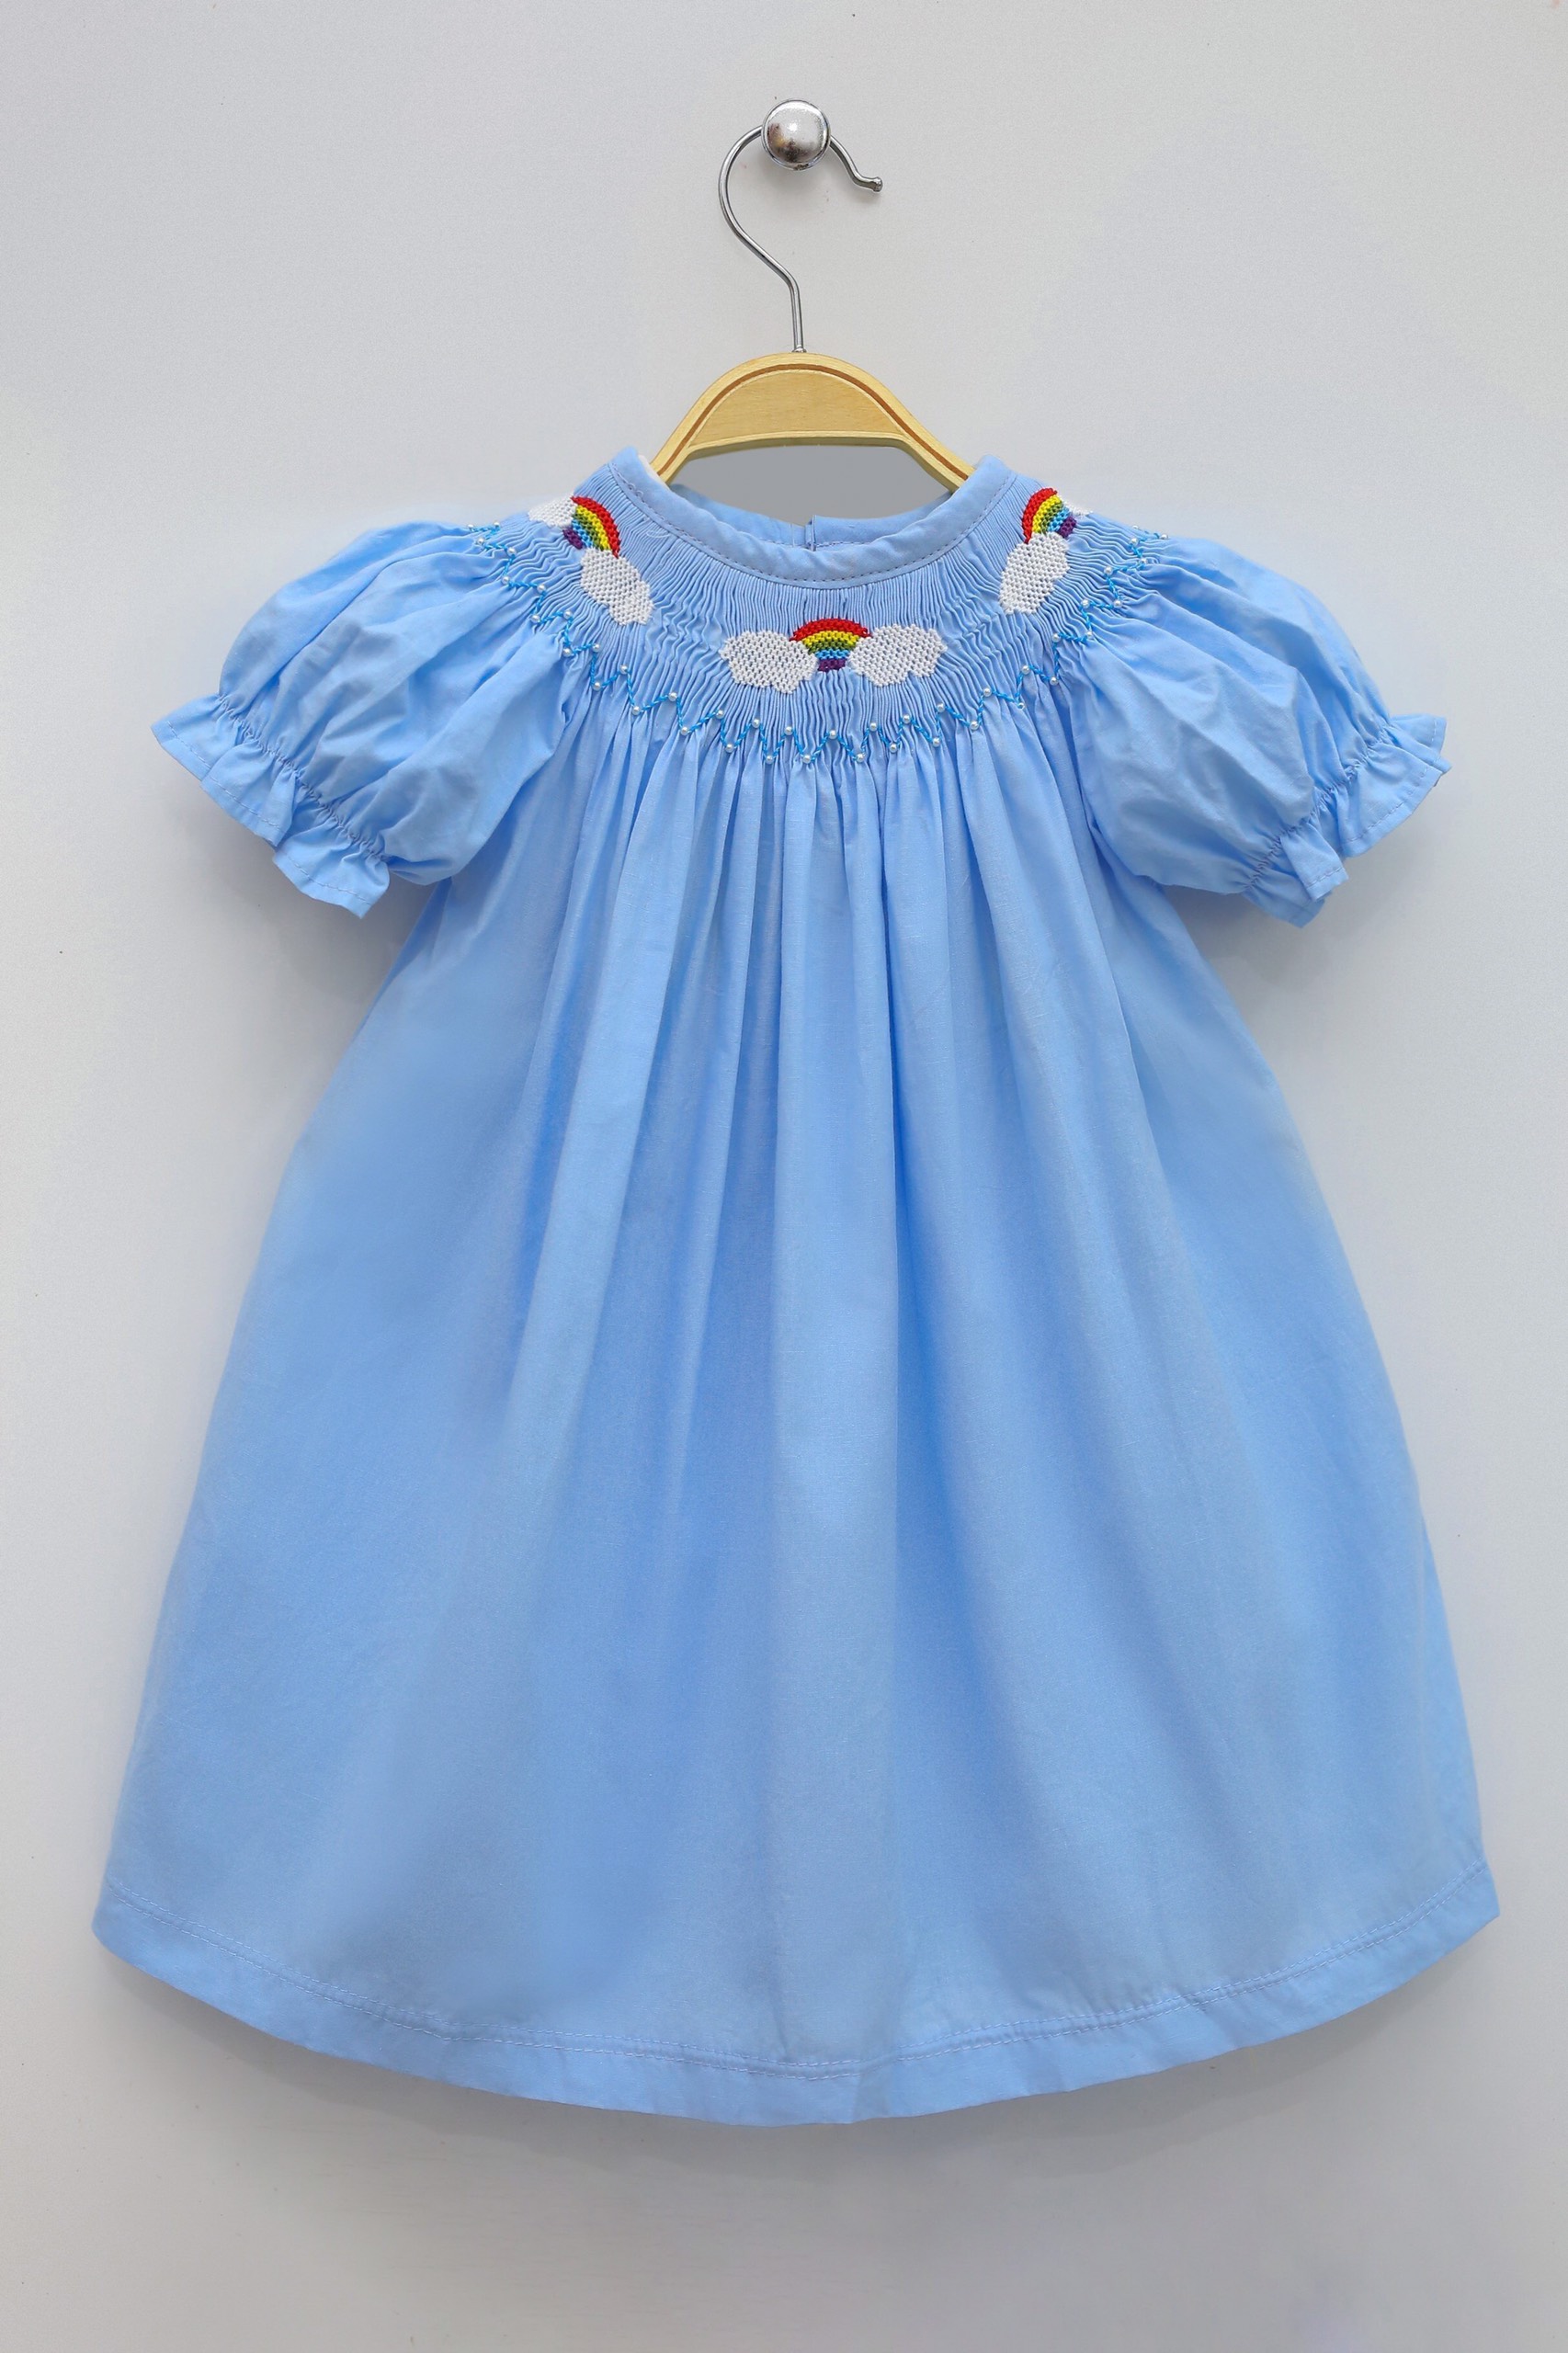 Blue Smocking Dress With White Flowers